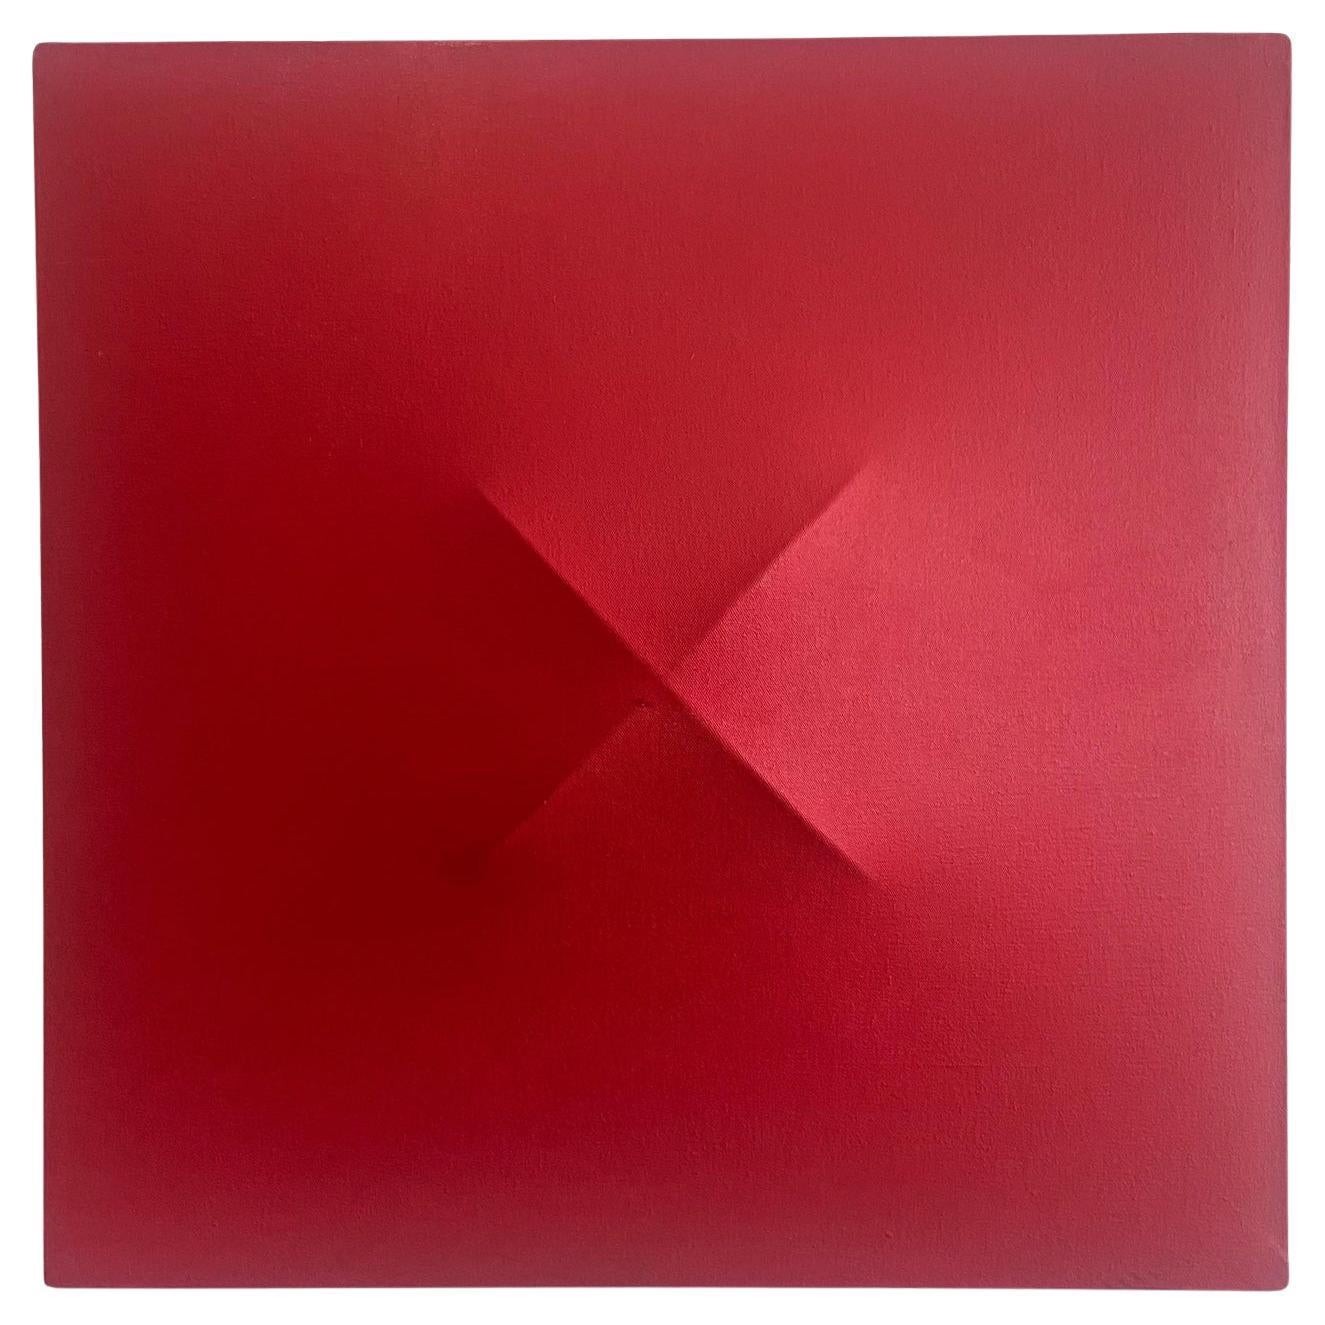 Tom Scmitt 1968 Shaped Canvas 3 Dimensional Acrylic on Canvas in Red